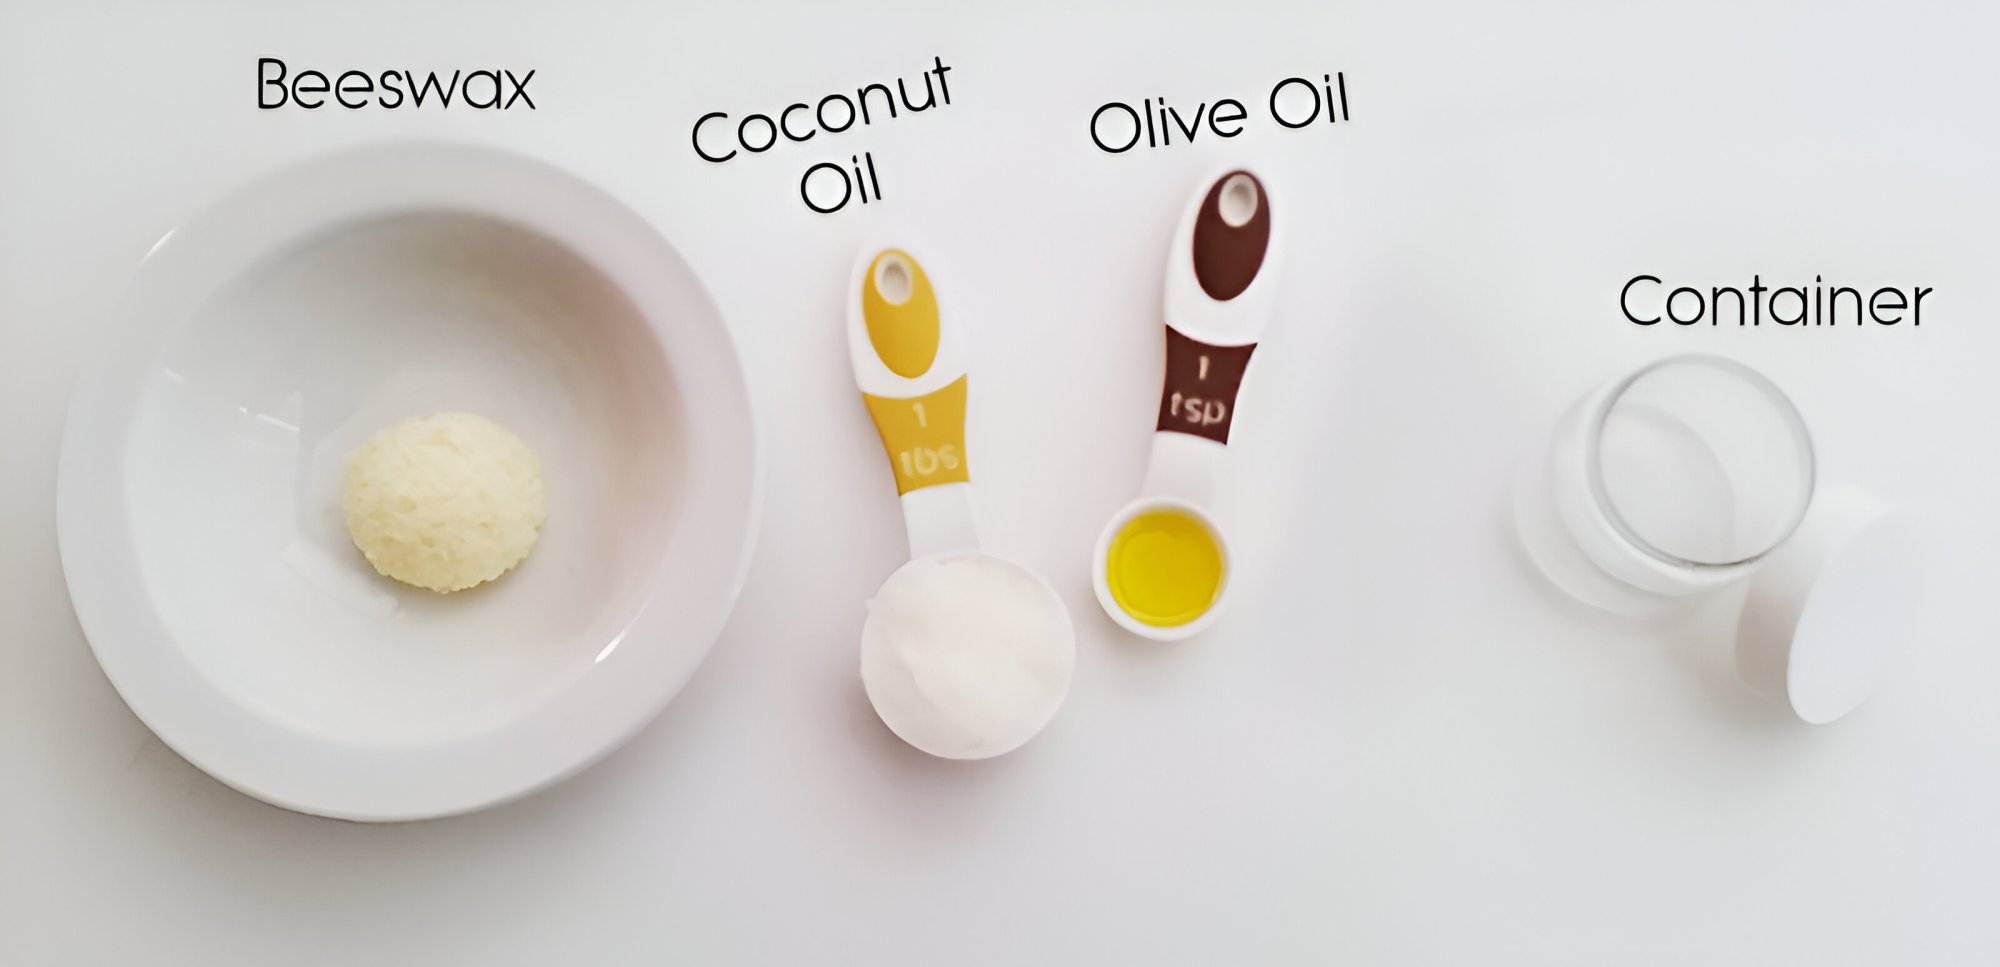 Coconut Oil And Olive Oil